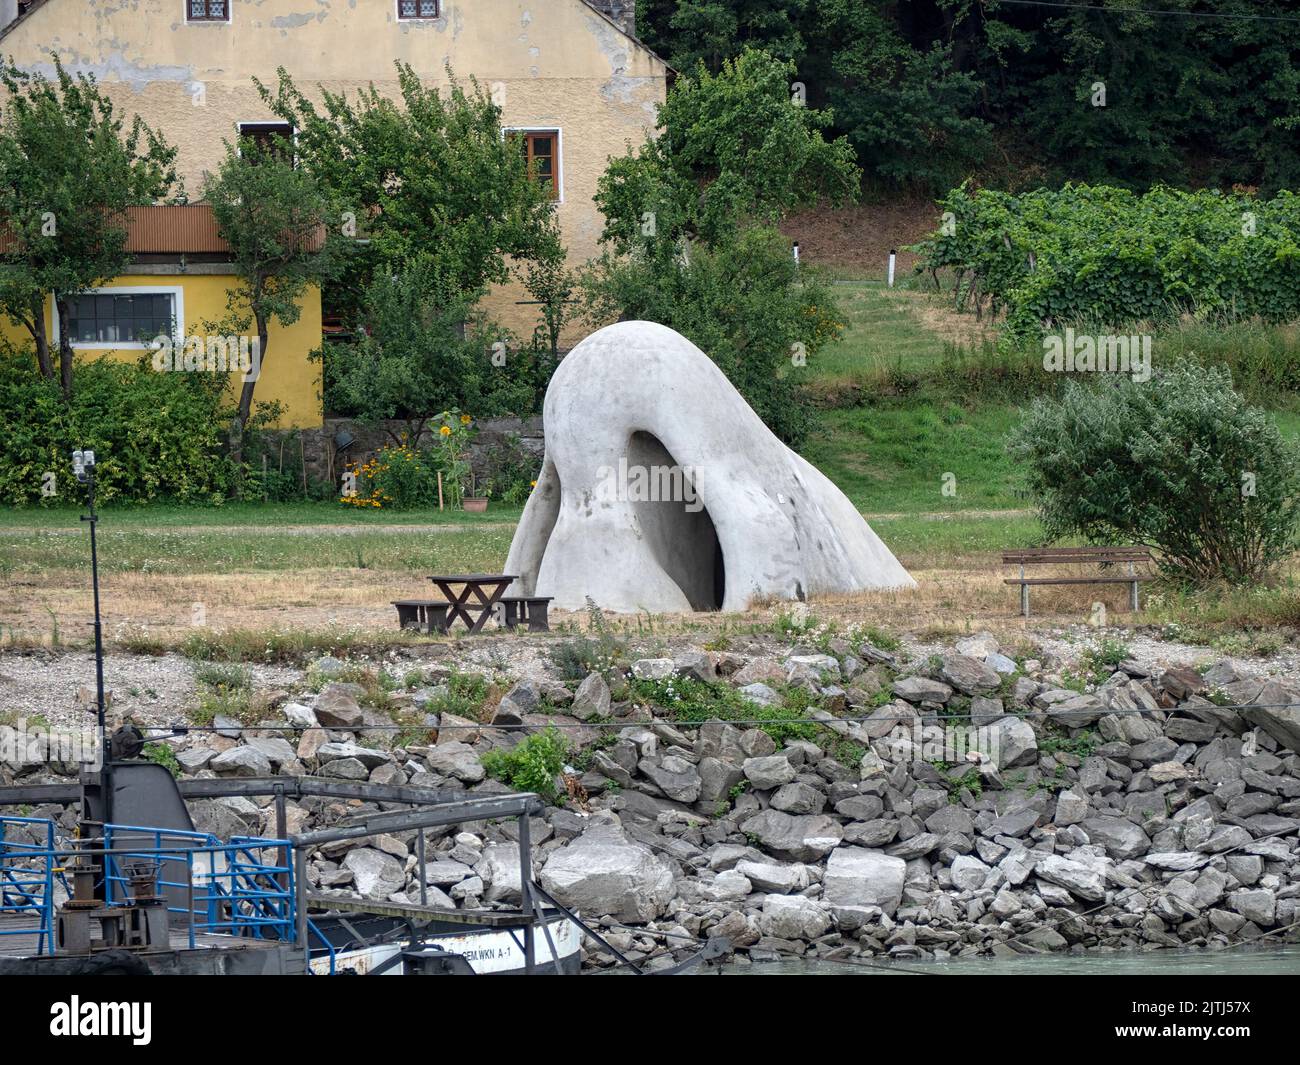 ST. LORENZ, AUSTRIA - JULY 13, 2019:  The Wachauer Nose sculpture at the ferry station Stock Photo